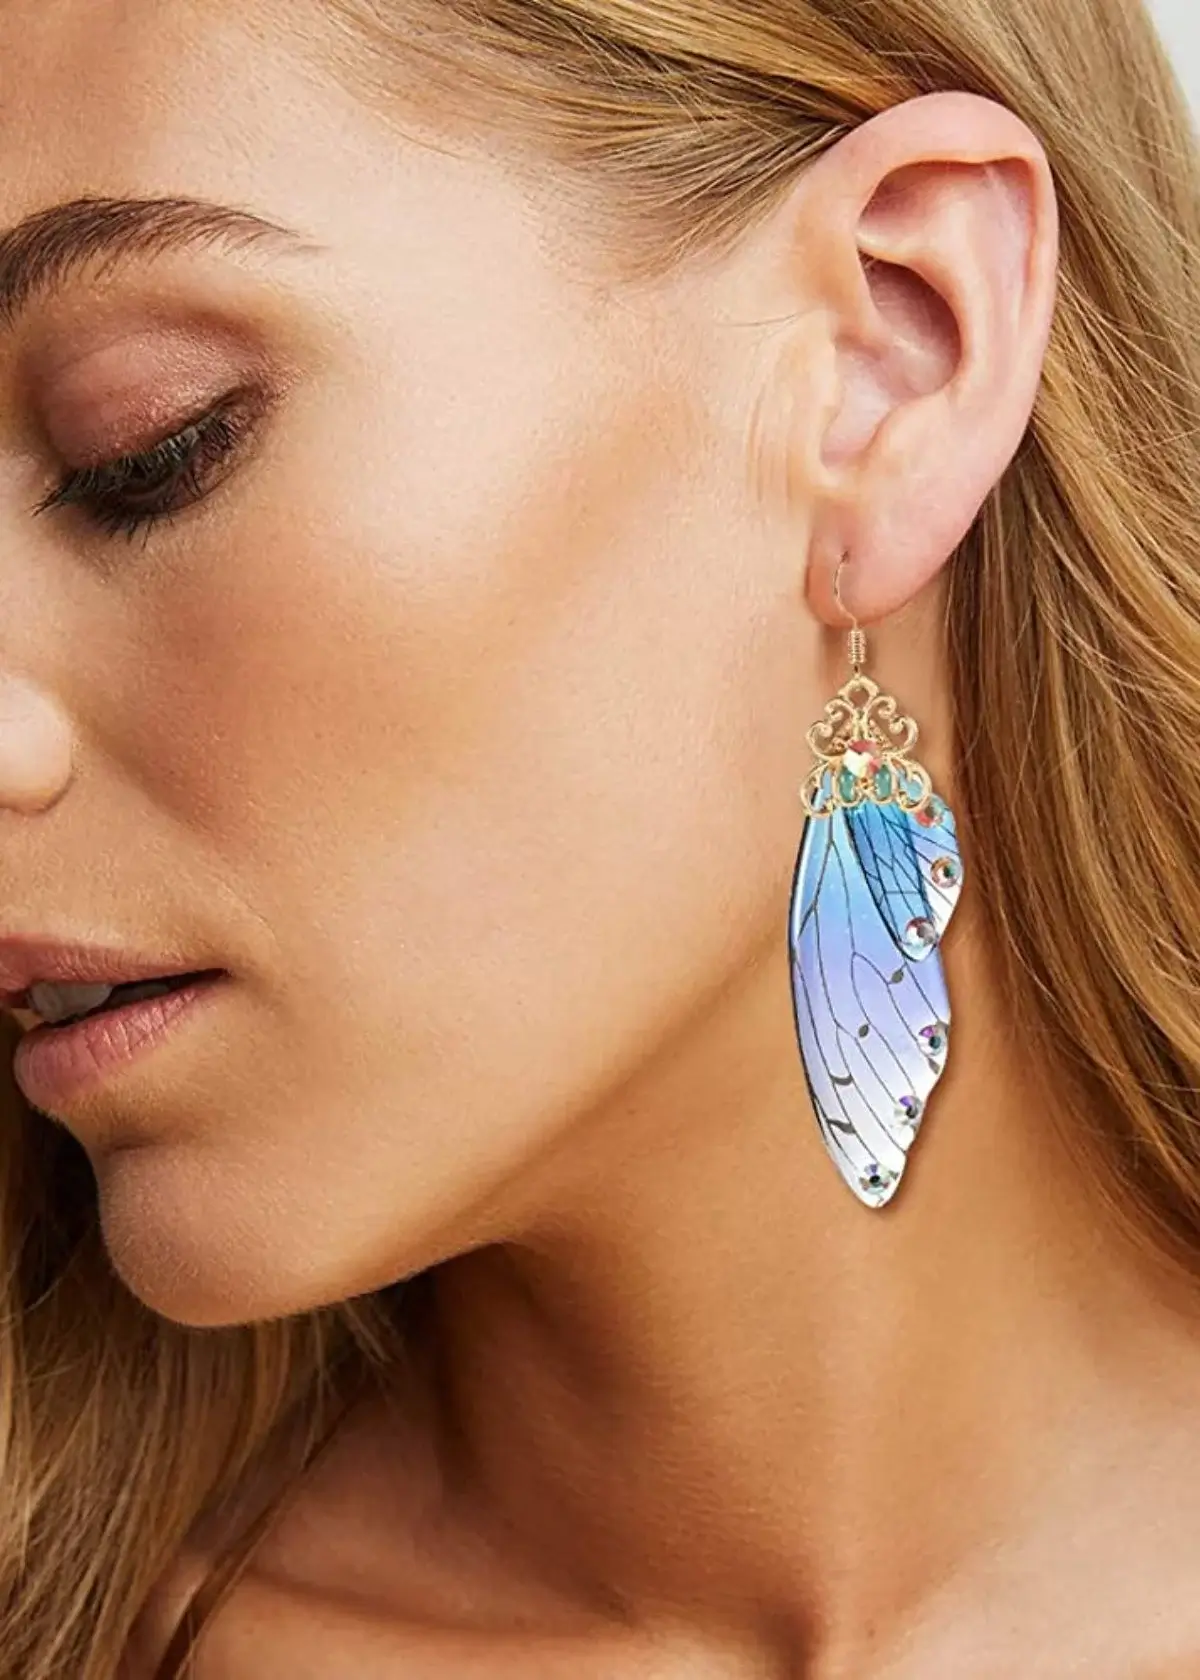 How to make Butterfly Wing Earrings?